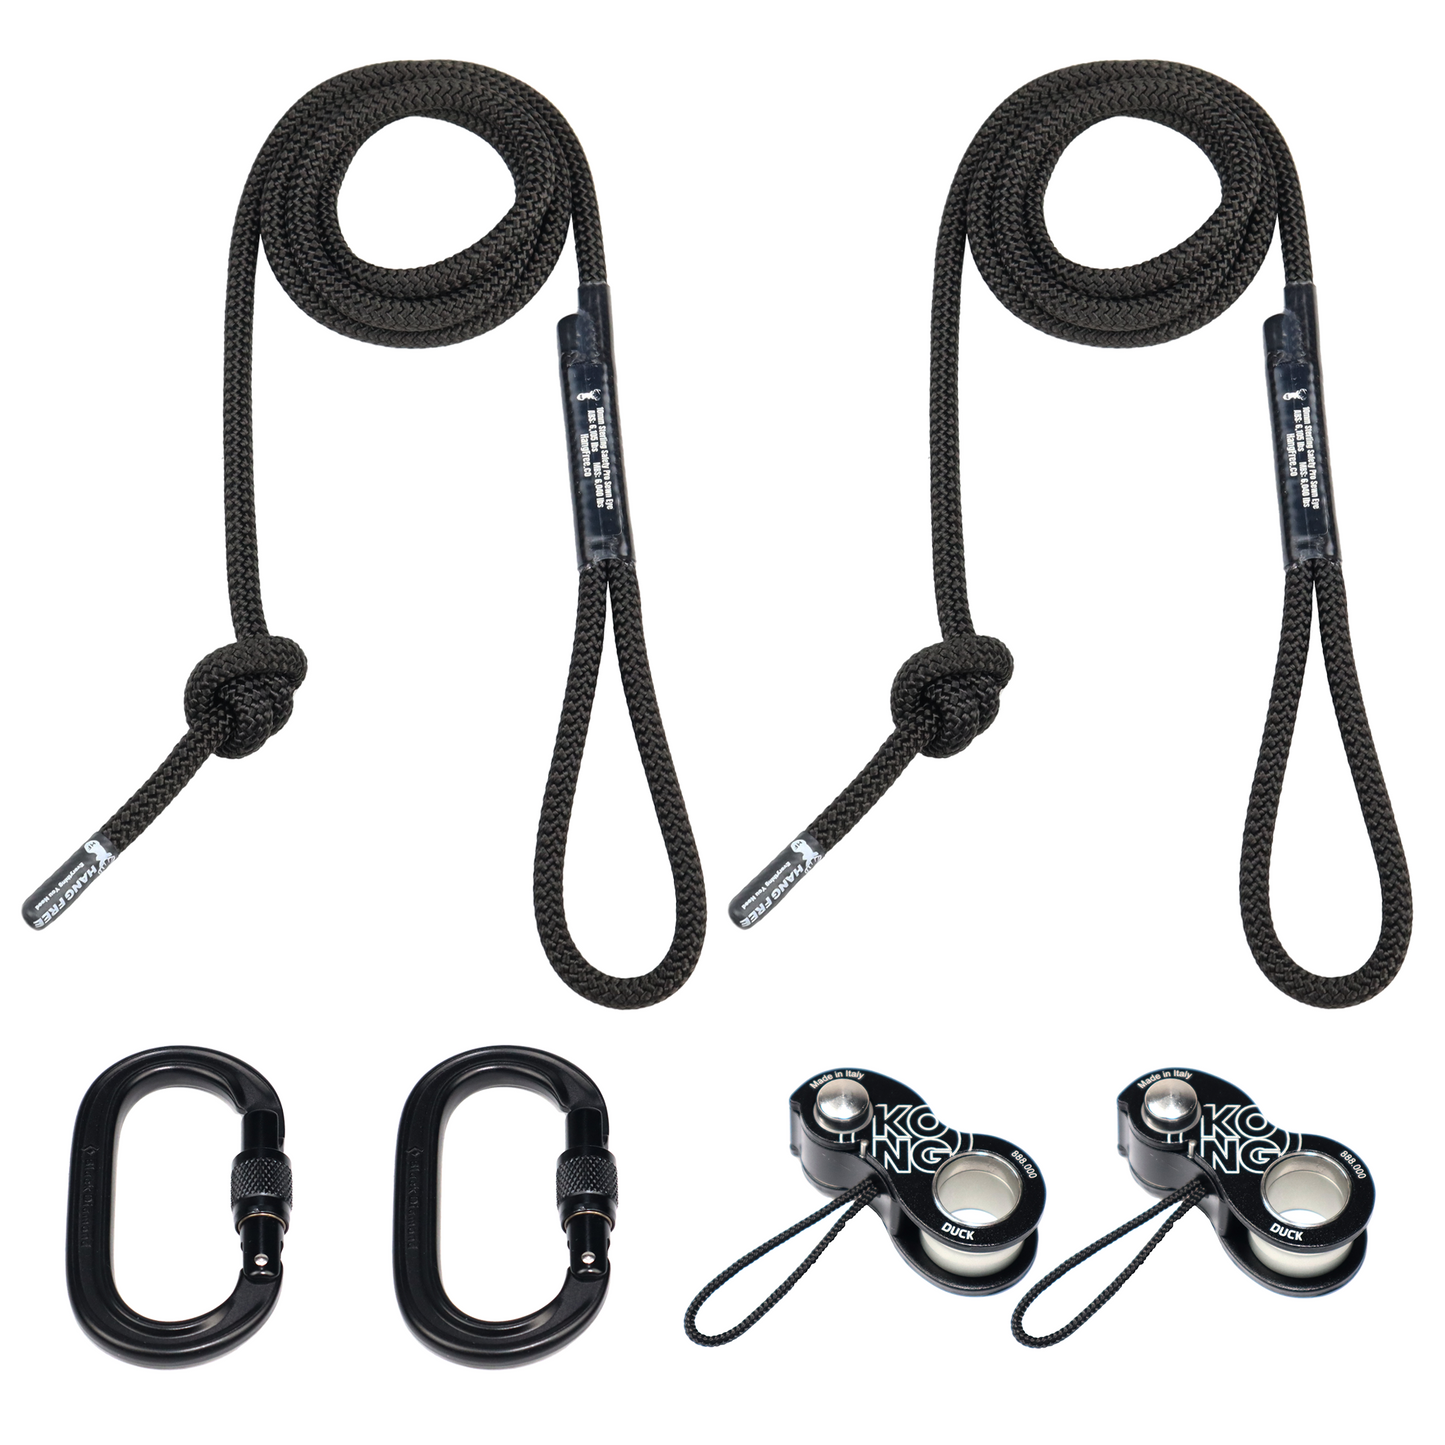 10mm BlackOut Deluxe Tether & Lineman's Package With Carabiners